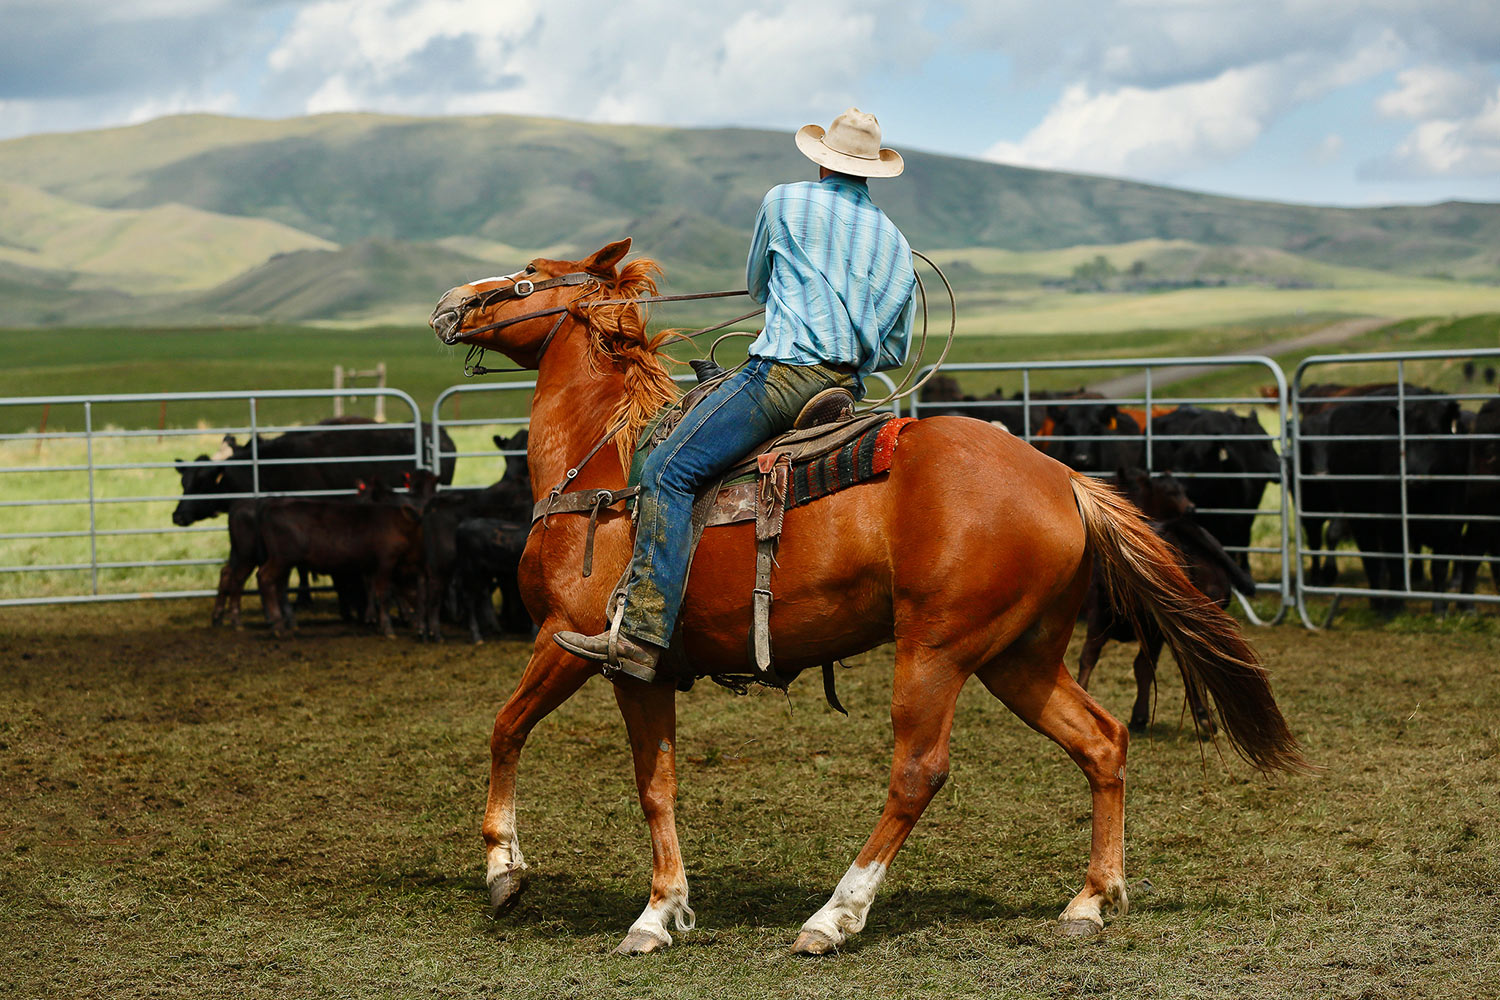 A cowboy makes a tight turn inside the corral on a western ranch.&nbsp;→ Buy a Print